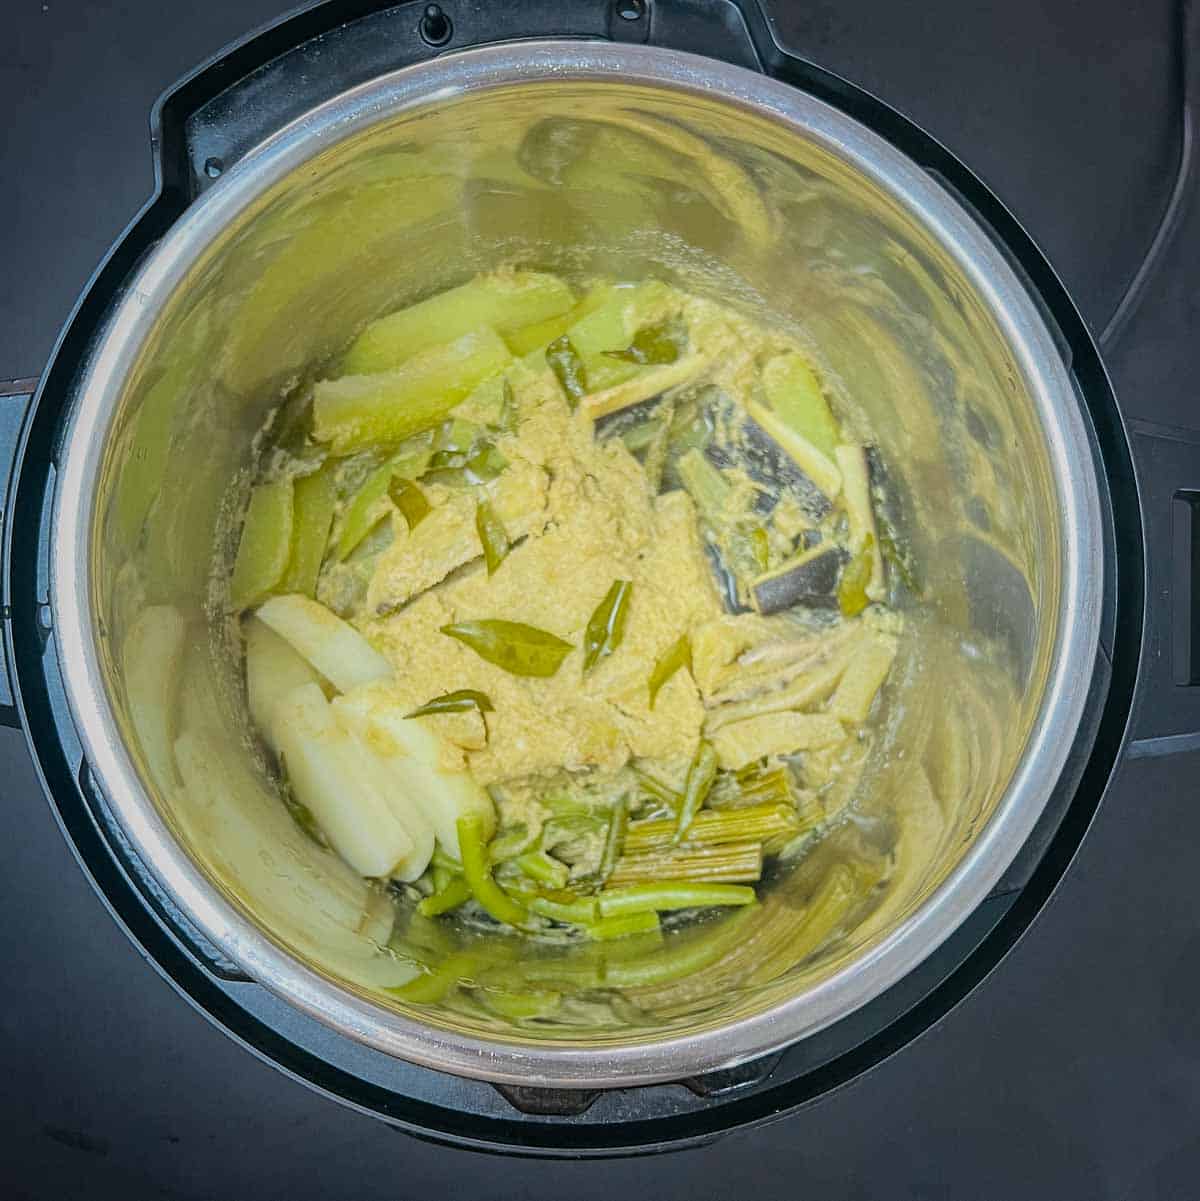 Pressure cooked vegetables in the Instant Pot.